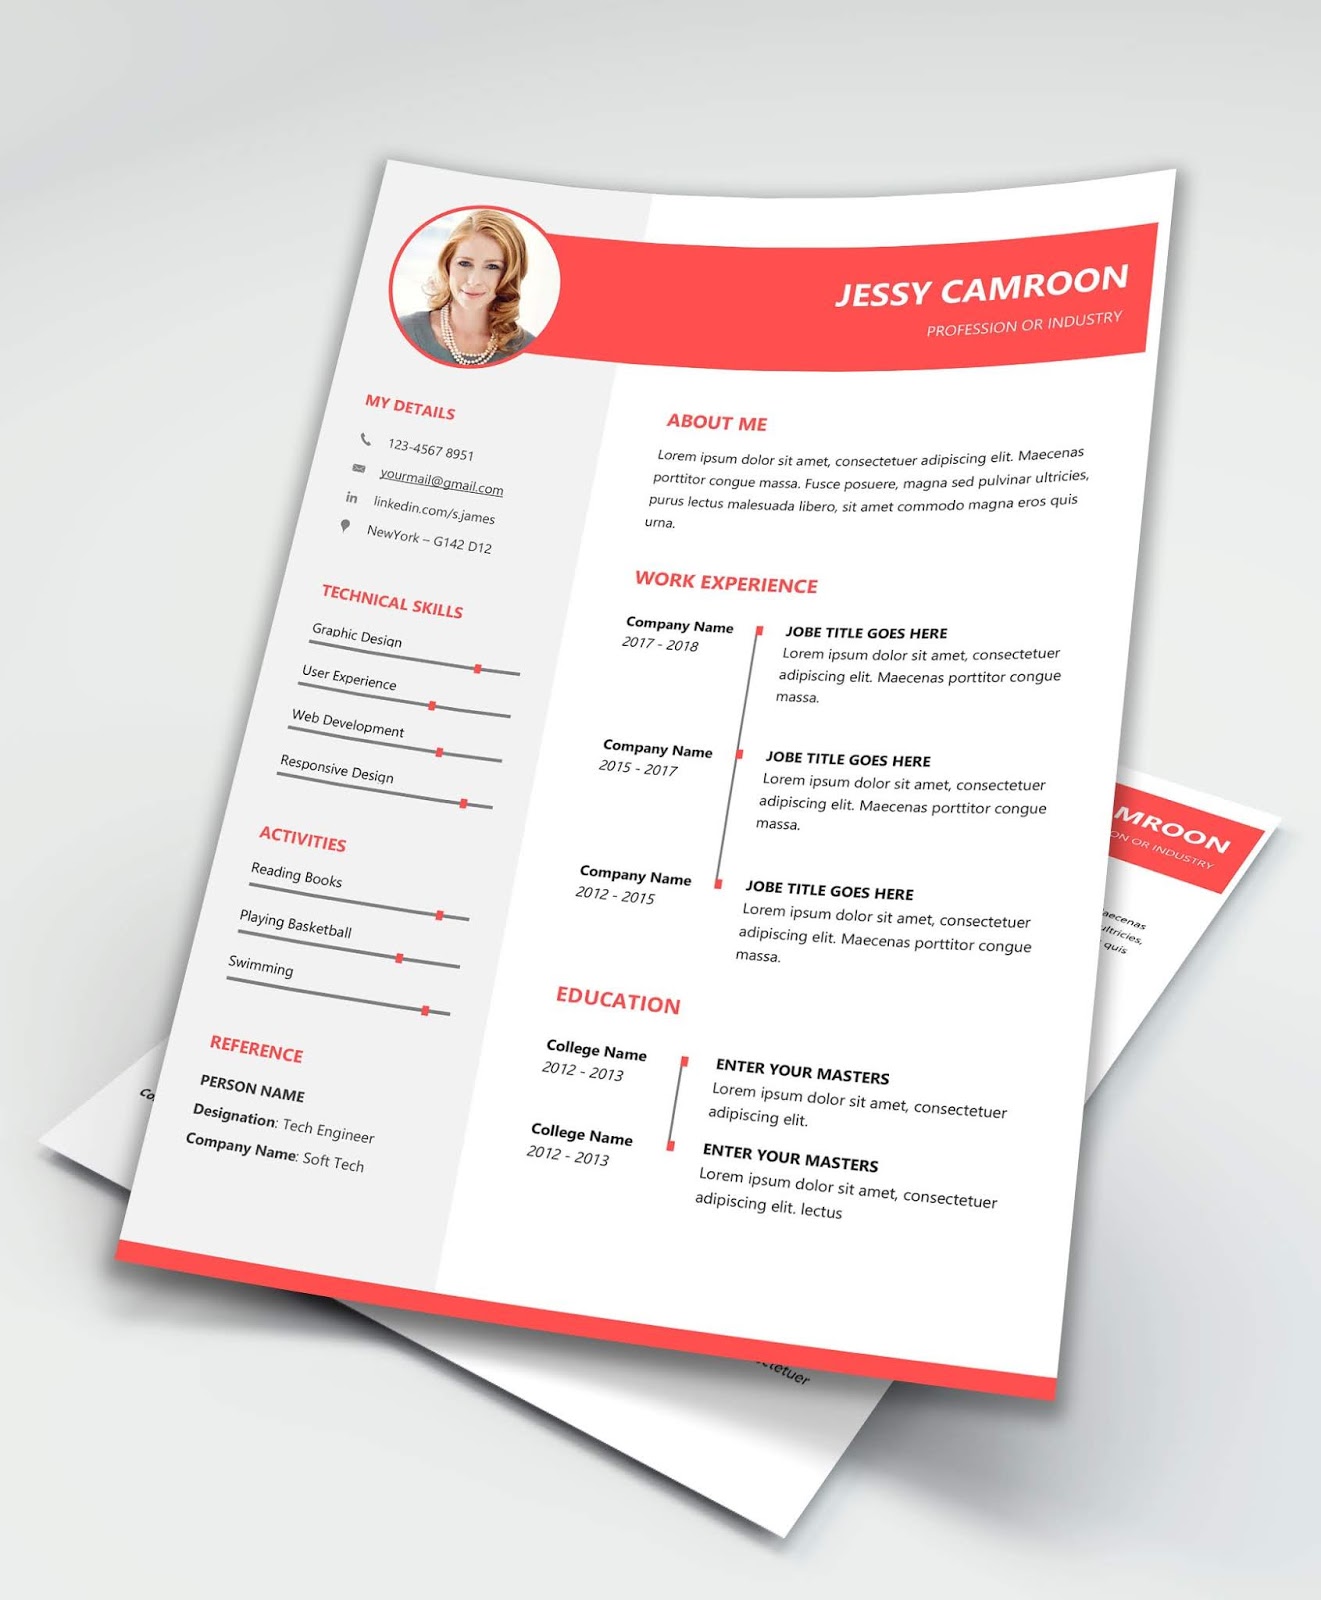 basic resume template word free download free resume template wordpress free resume templates wordpress free resume template word free resume template word document download free resume template word document free resume template word creative free resume templates word download free resume templates word 2018 free resume templates word document free resume templates word 2019 free resume templates word doc